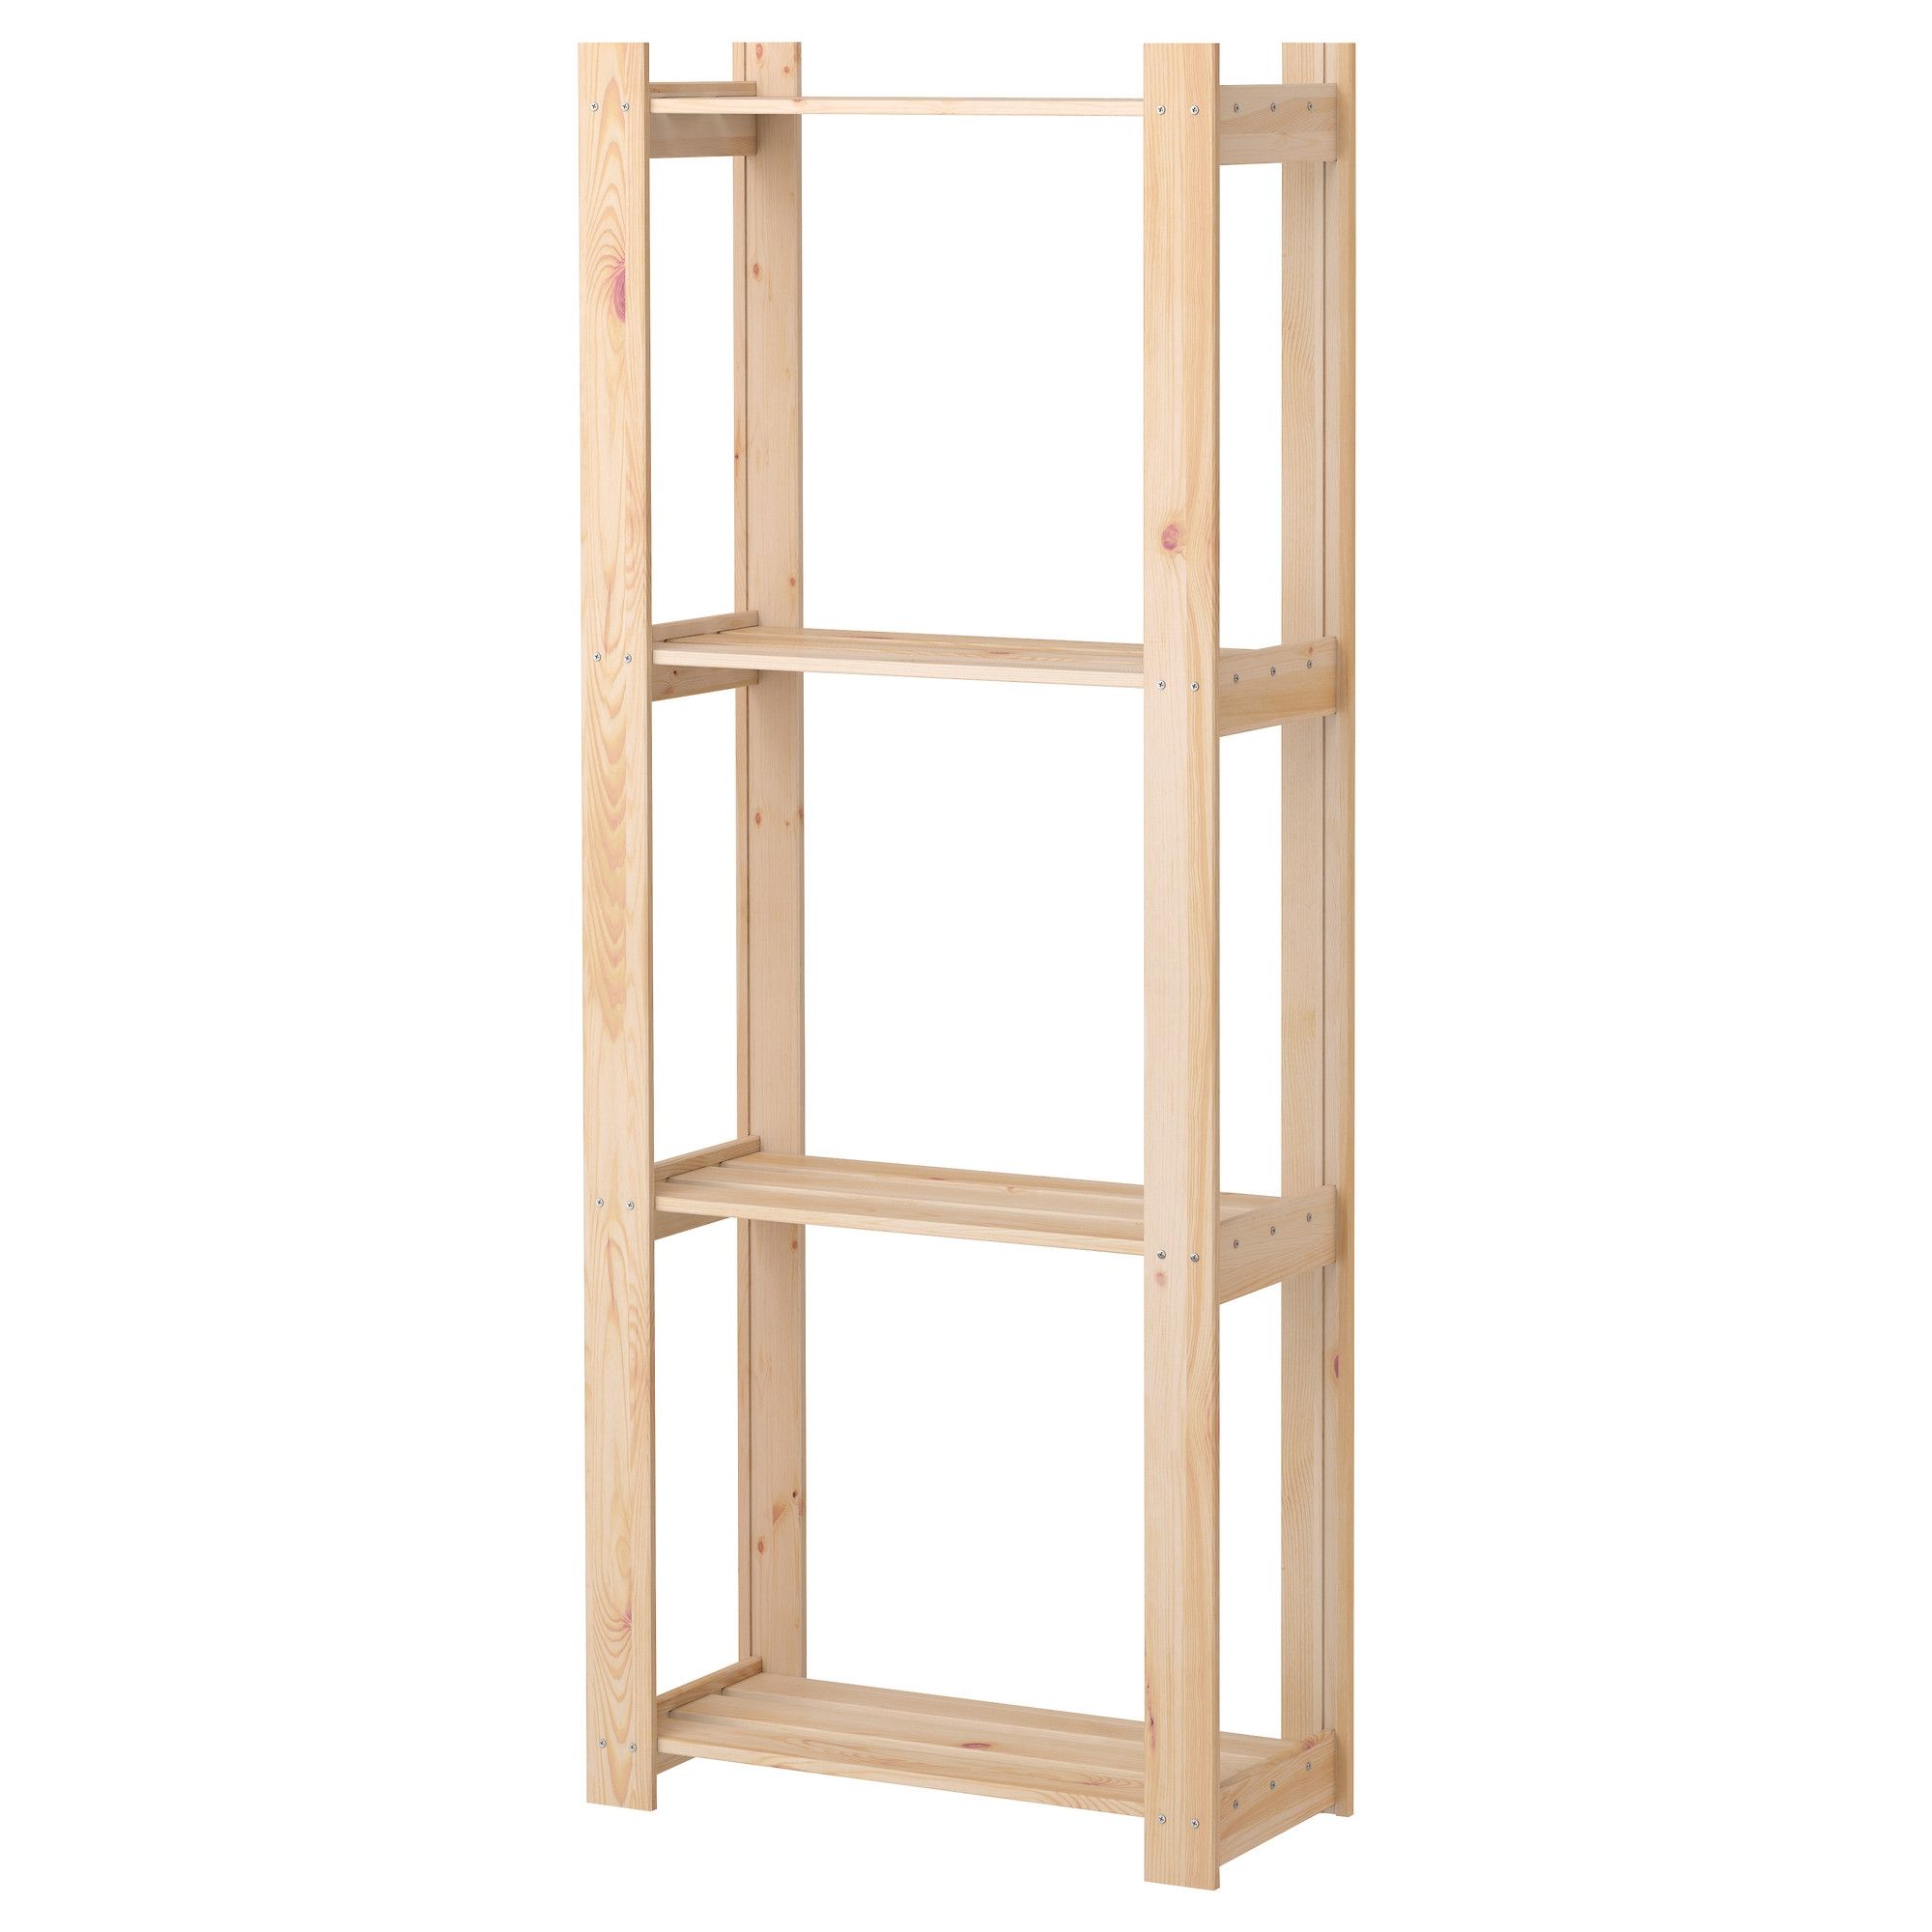 Shelving Units Systems Ikea Ireland In Cheap Shelving Units (View 6 of 15)